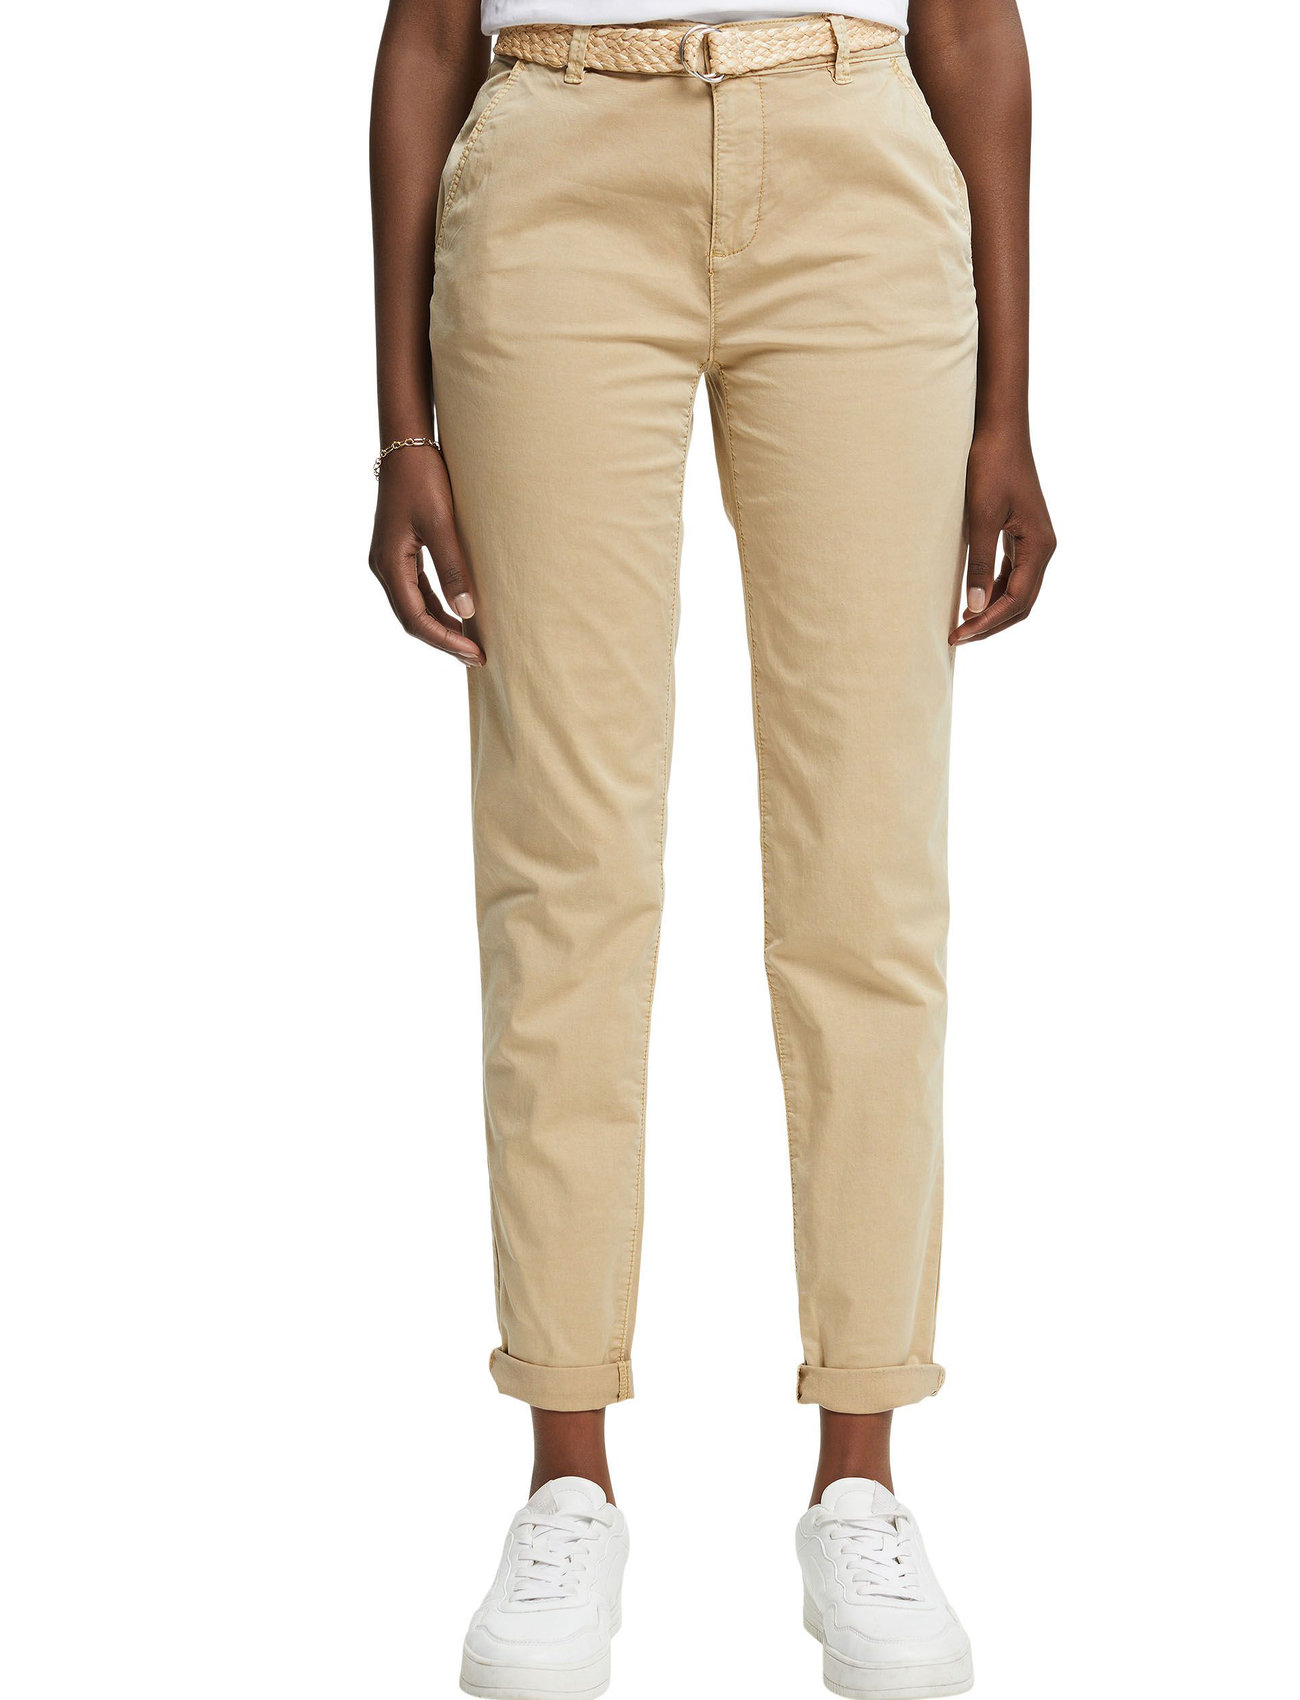 Esprit Casual - Cropped chinos - chino's - sand - 1